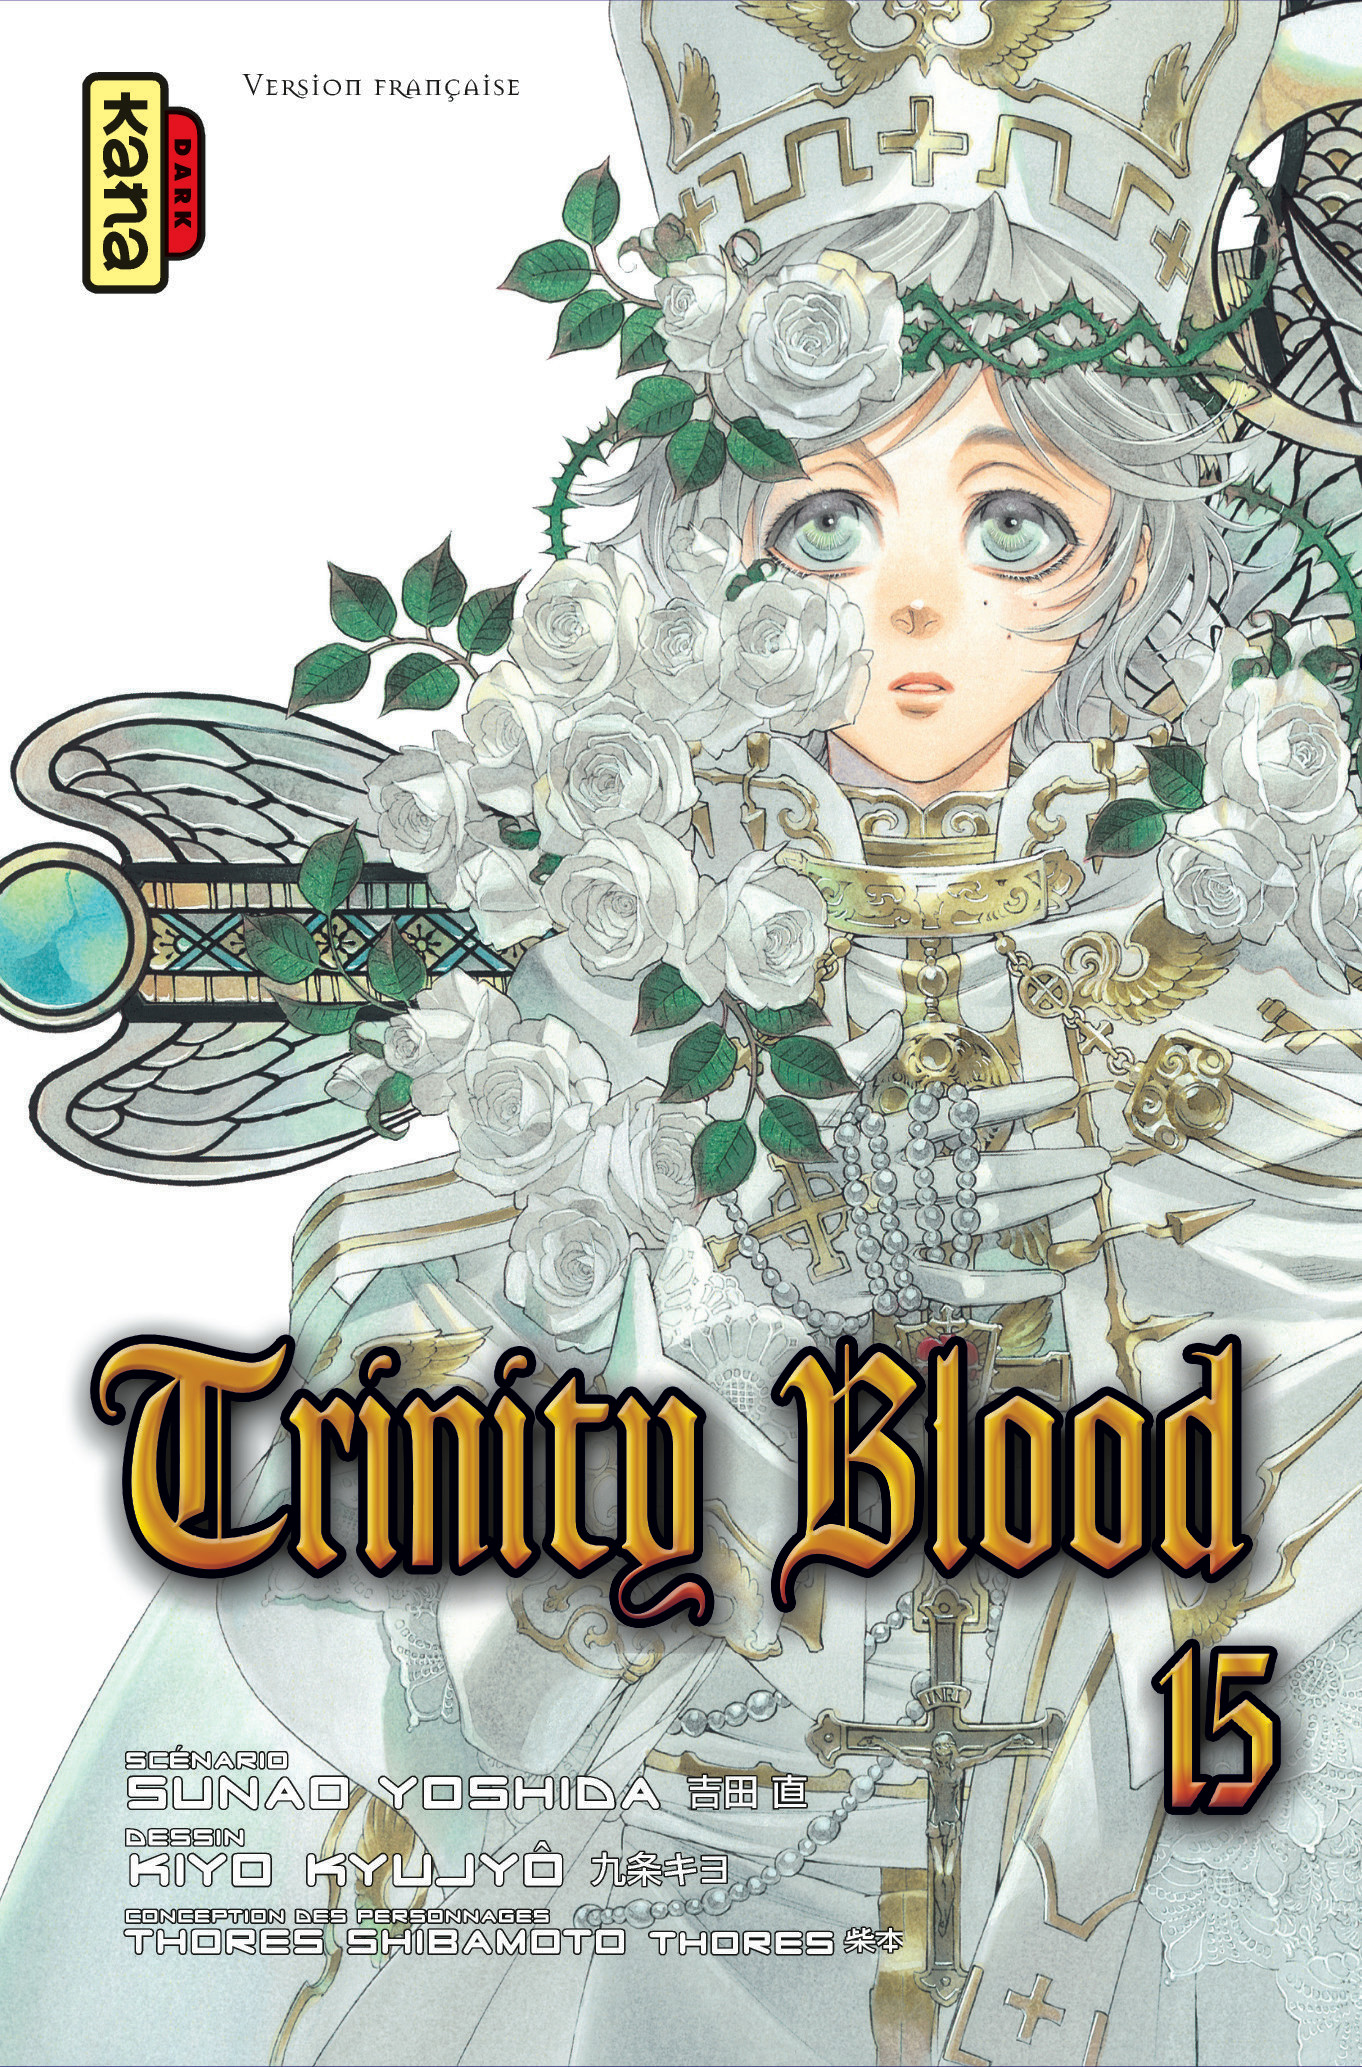 Trinity Blood – Tome 15 - couv